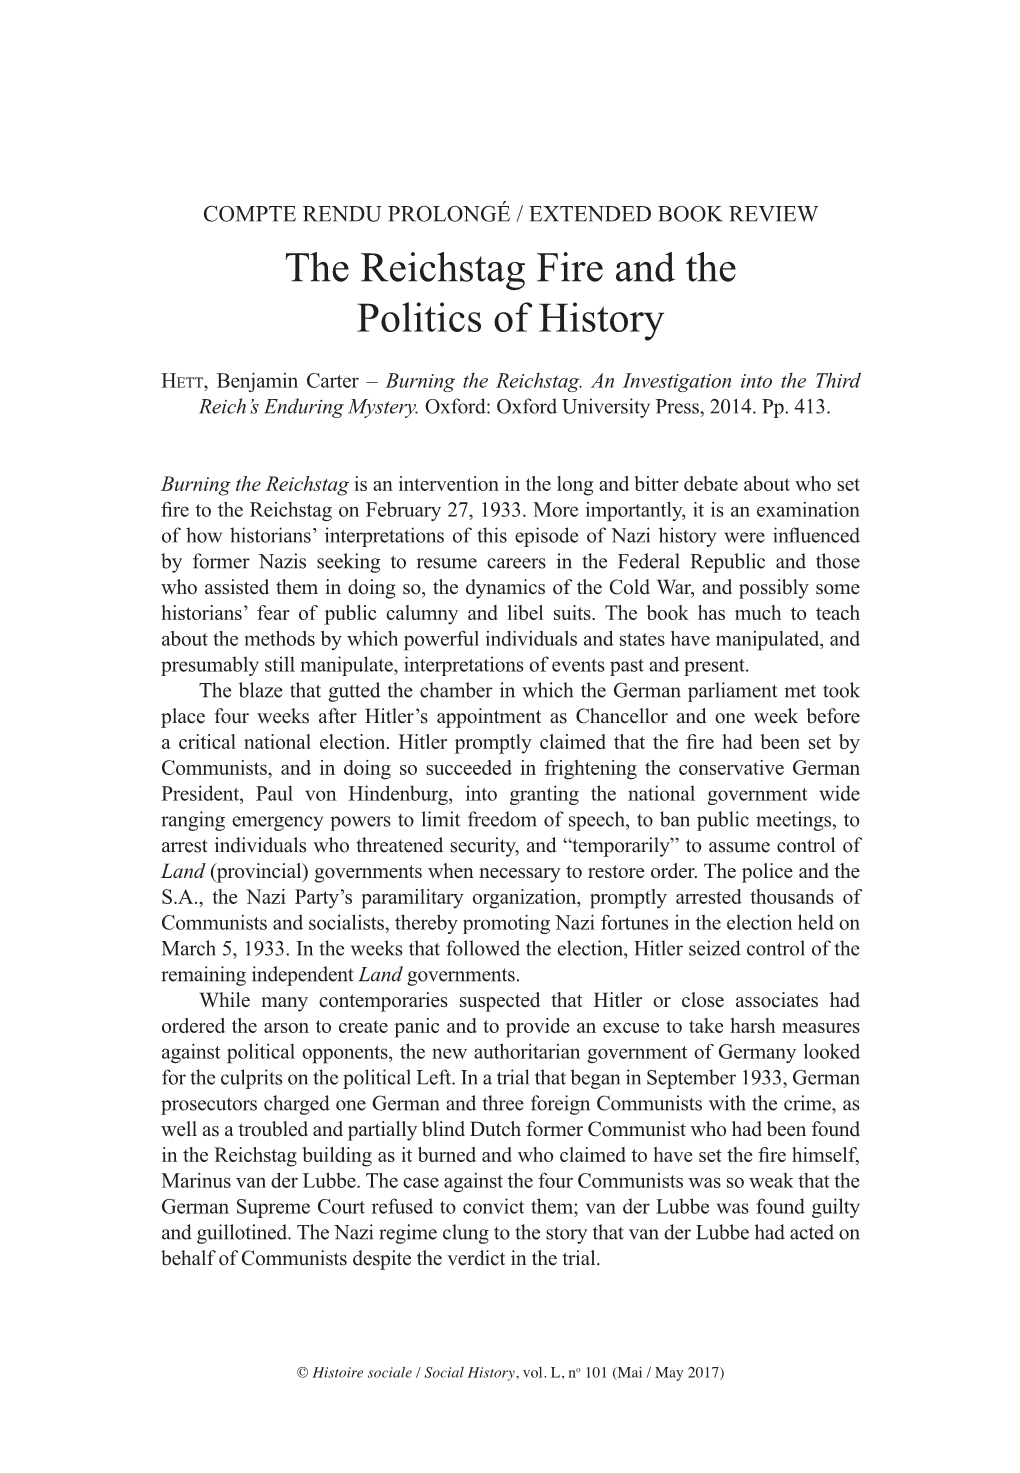 The Reichstag Fire and the Politics of History